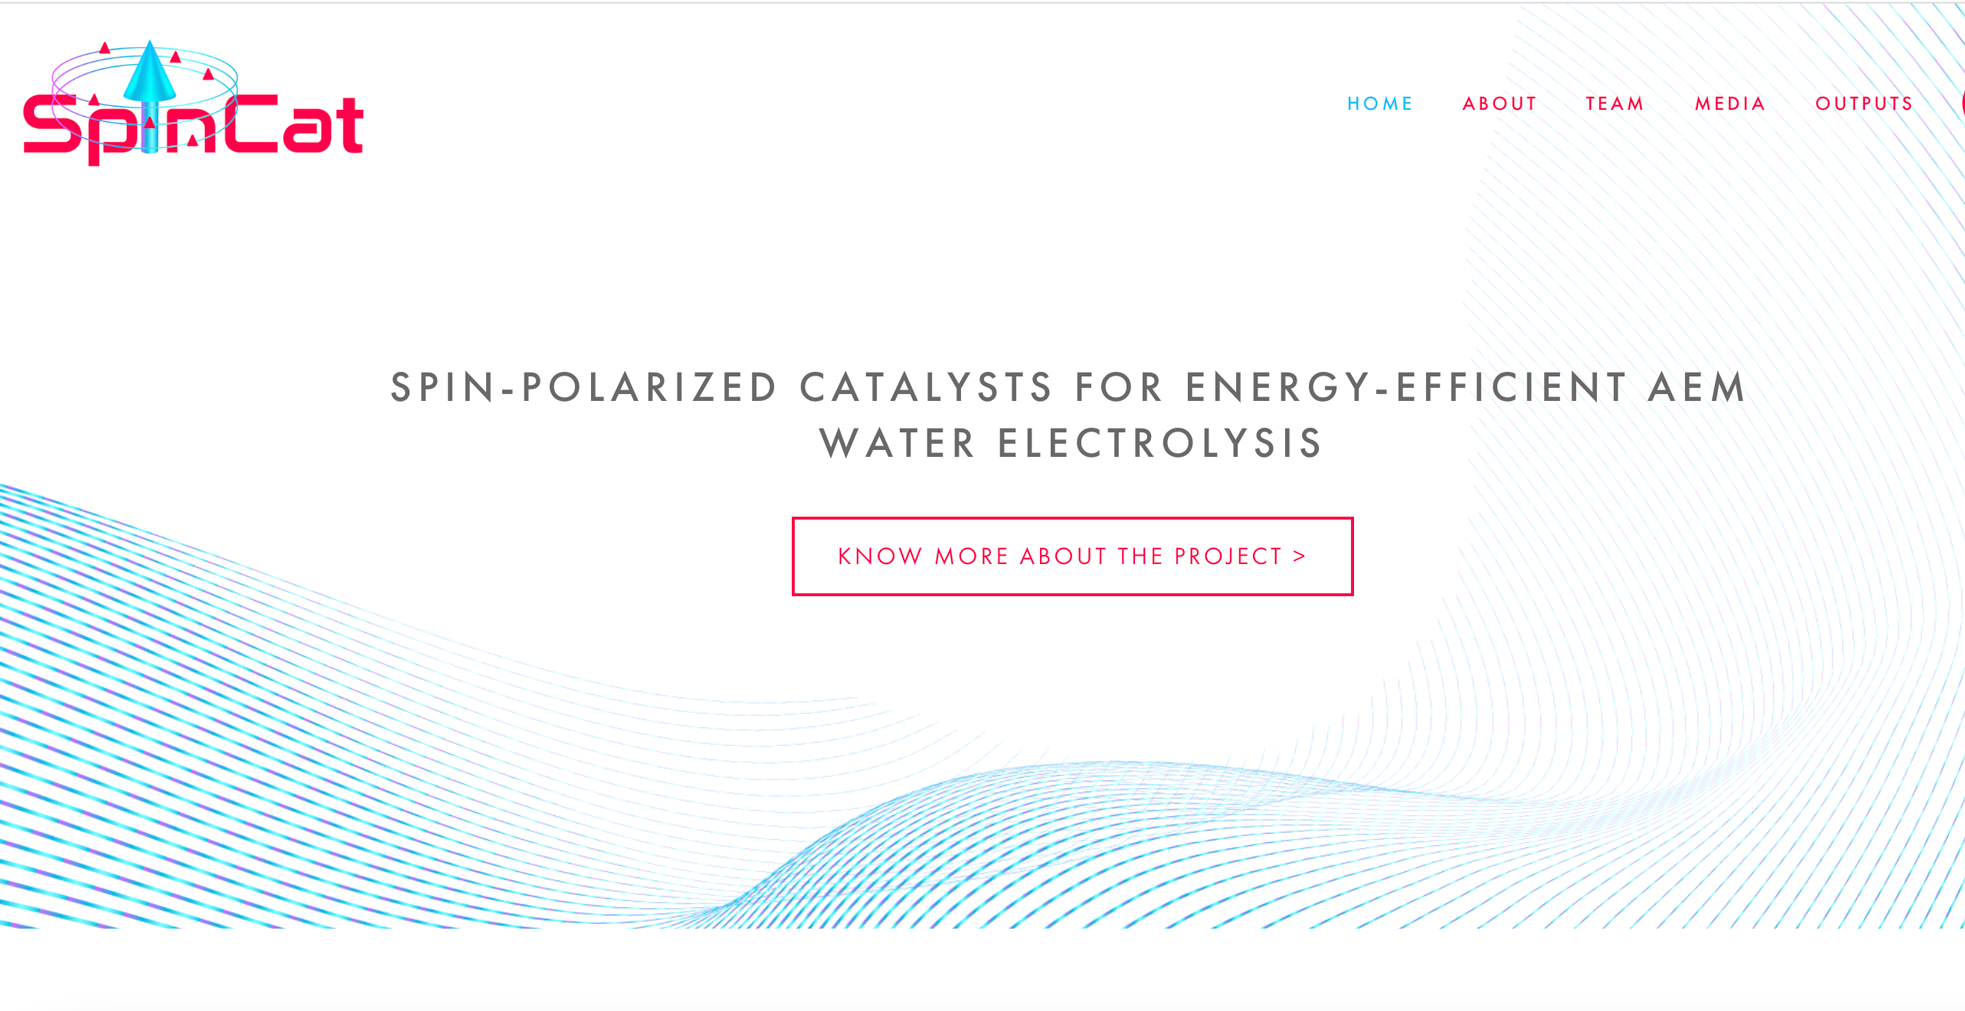 SpinCat, Spin-Polarized Catalysts for Energy-efficient AEM Water Electrolysis